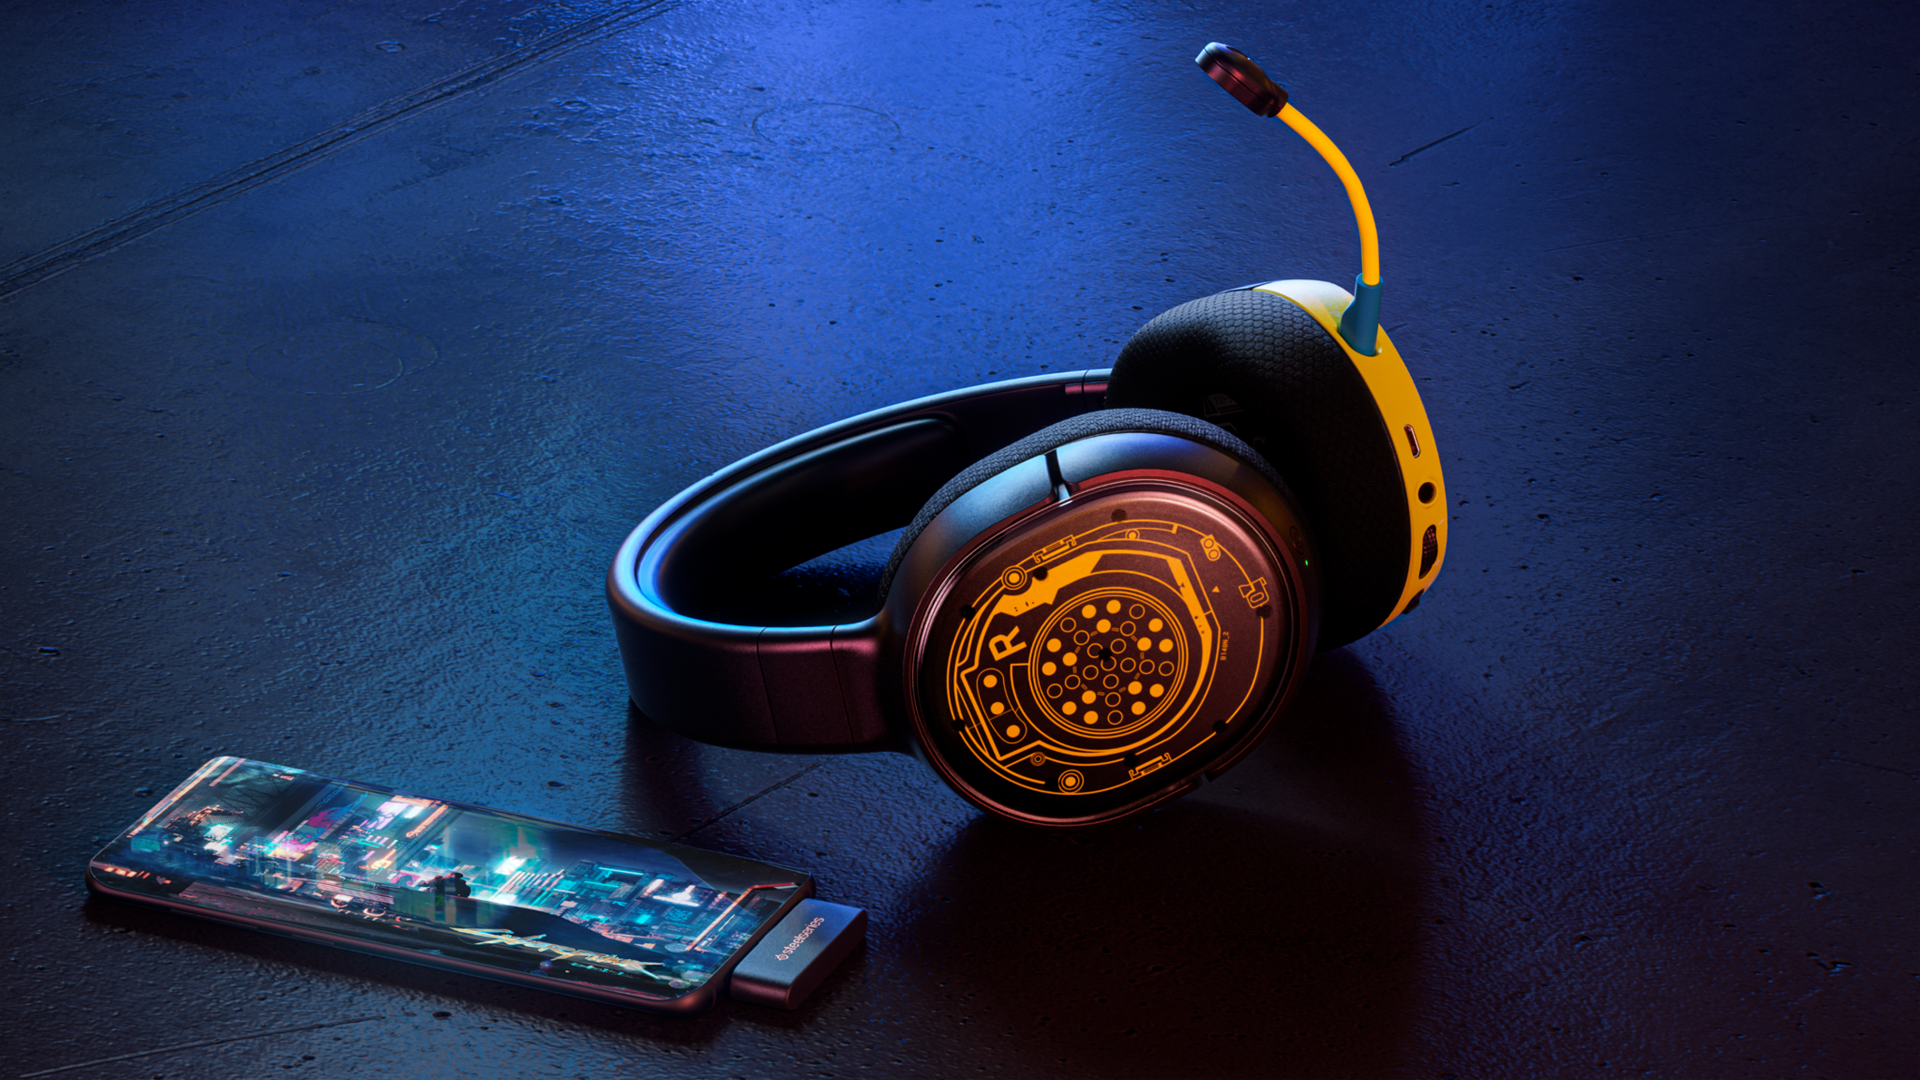 Gematigd de eerste Perceptie SteelSeries, Cyberpunk 2077 team up to make official headsets - 9to5Toys